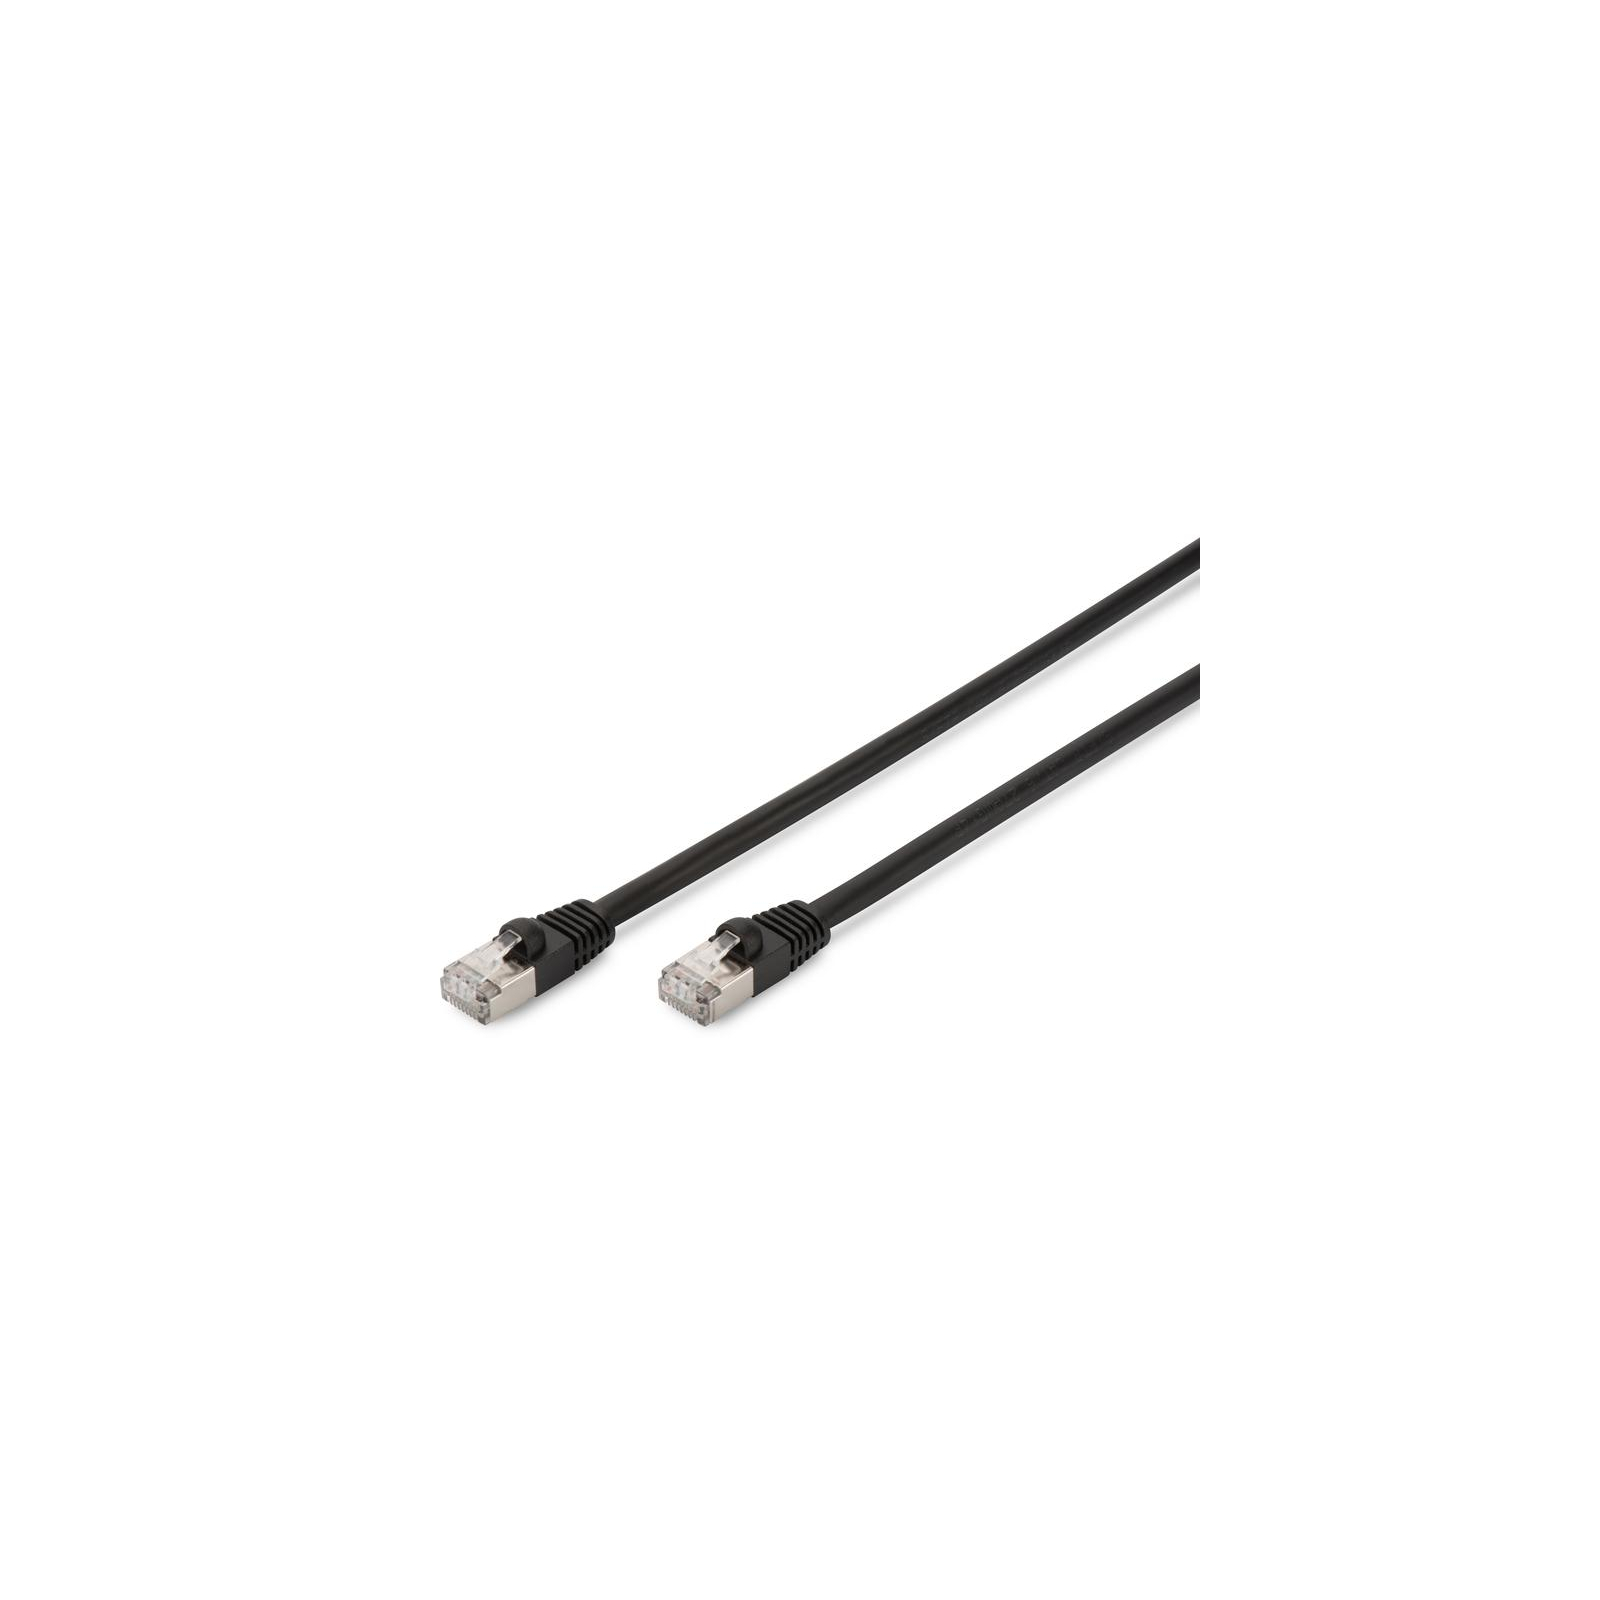 Патч-корд 5м, CAT 6 S-FTP AWG 27/7, FRPE, outdoor Digitus (DK-1644-050/BL-OD)